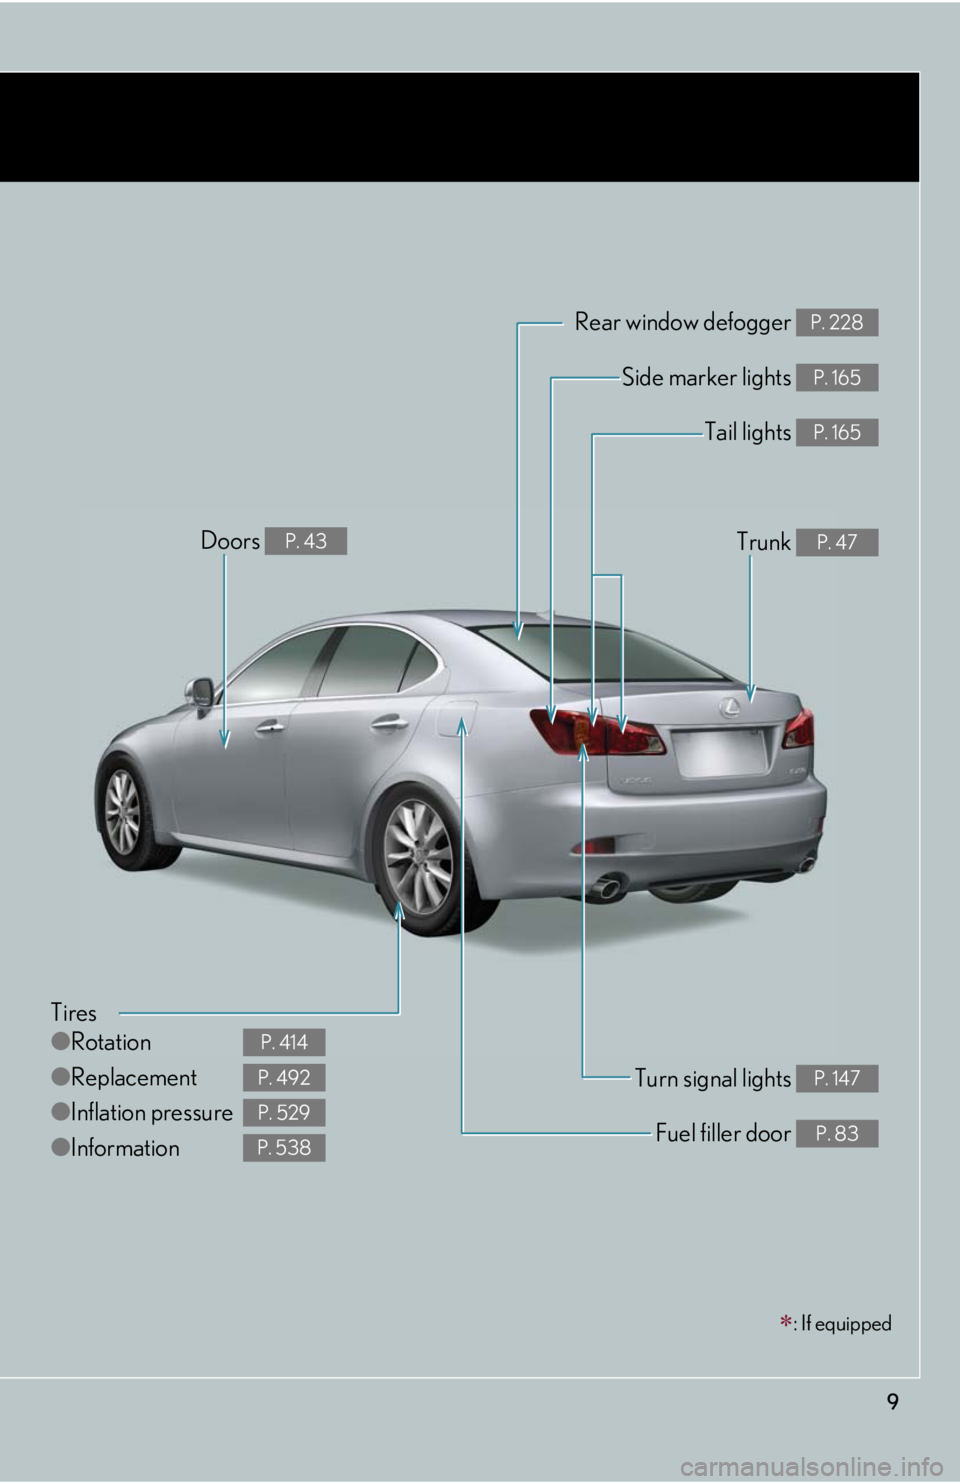 Lexus IS250 2010  Using The Air Conditioning System And Defogger / LEXUS 2010 IS350 IS250 OWNERS MANUAL (OM53A23U) 9
: If equipped
Tires
●Rotation
●Replacement
●Inflation pressure
●Information
P. 414
P. 492
P. 529
P. 538
Tail lights P. 165
Side marker lights P. 165
Trunk P. 47
Rear window defogger P. 22